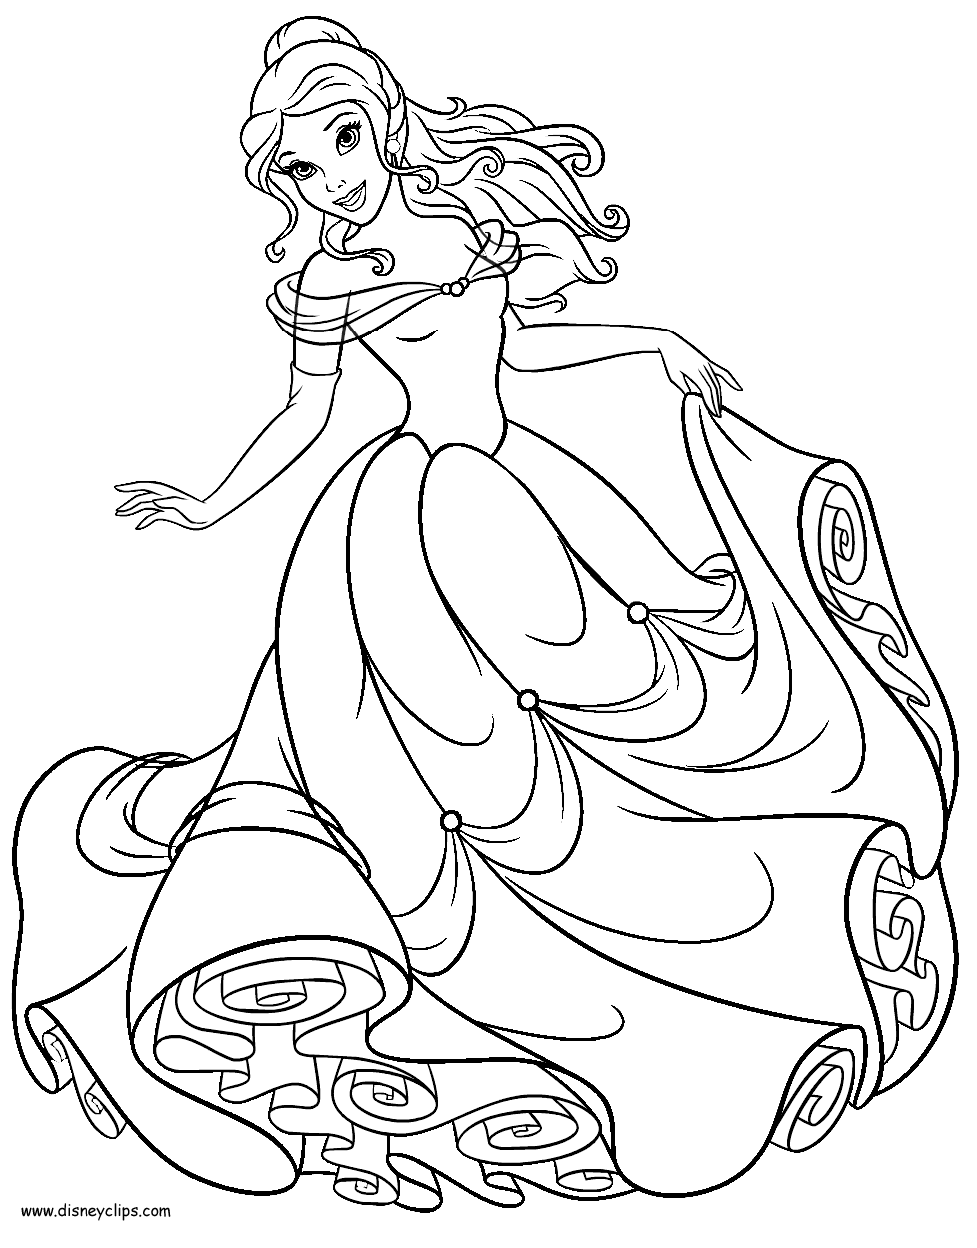 beauty and the beast pictures to colour beauty and the beast coloring pages 2 disneyclipscom beauty colour beast pictures to and the 